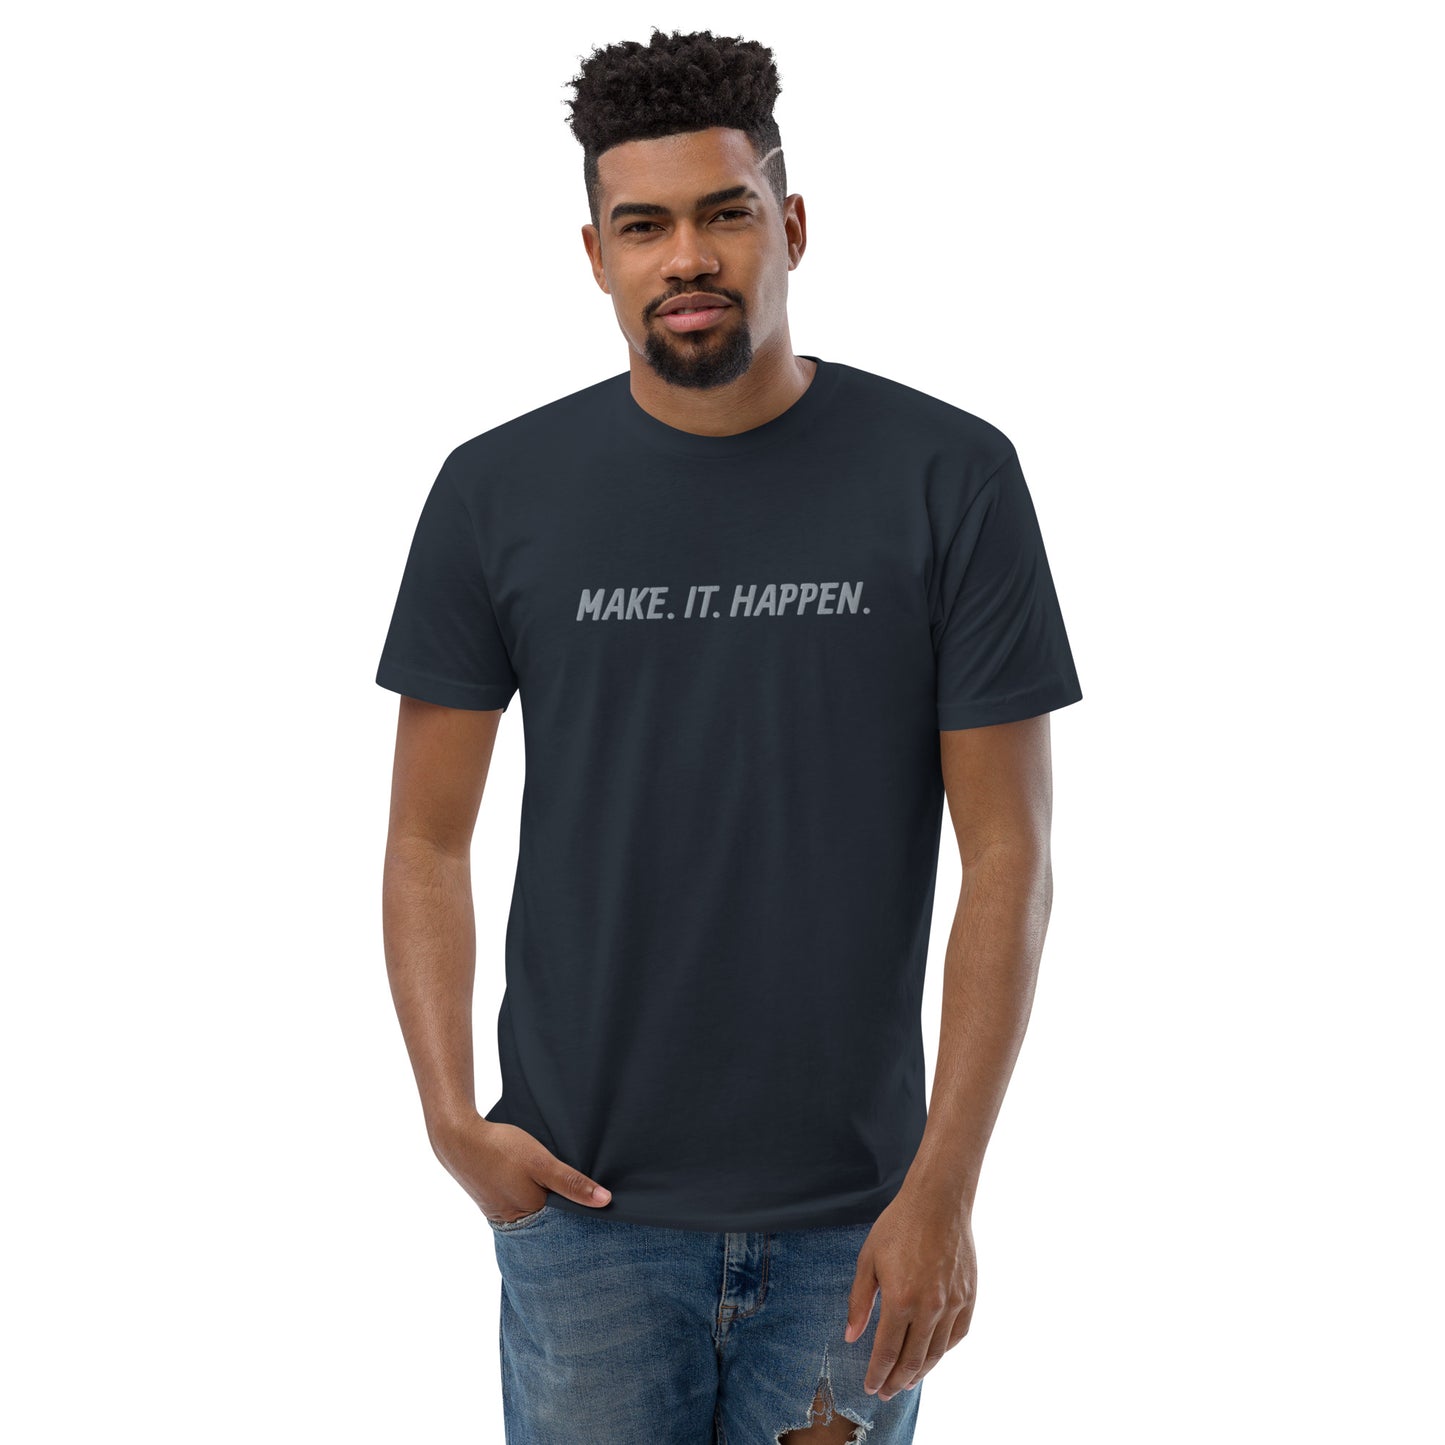 "MAKE. IT. HAPPEN." Embroidered T-shirt (Athletic Fit)